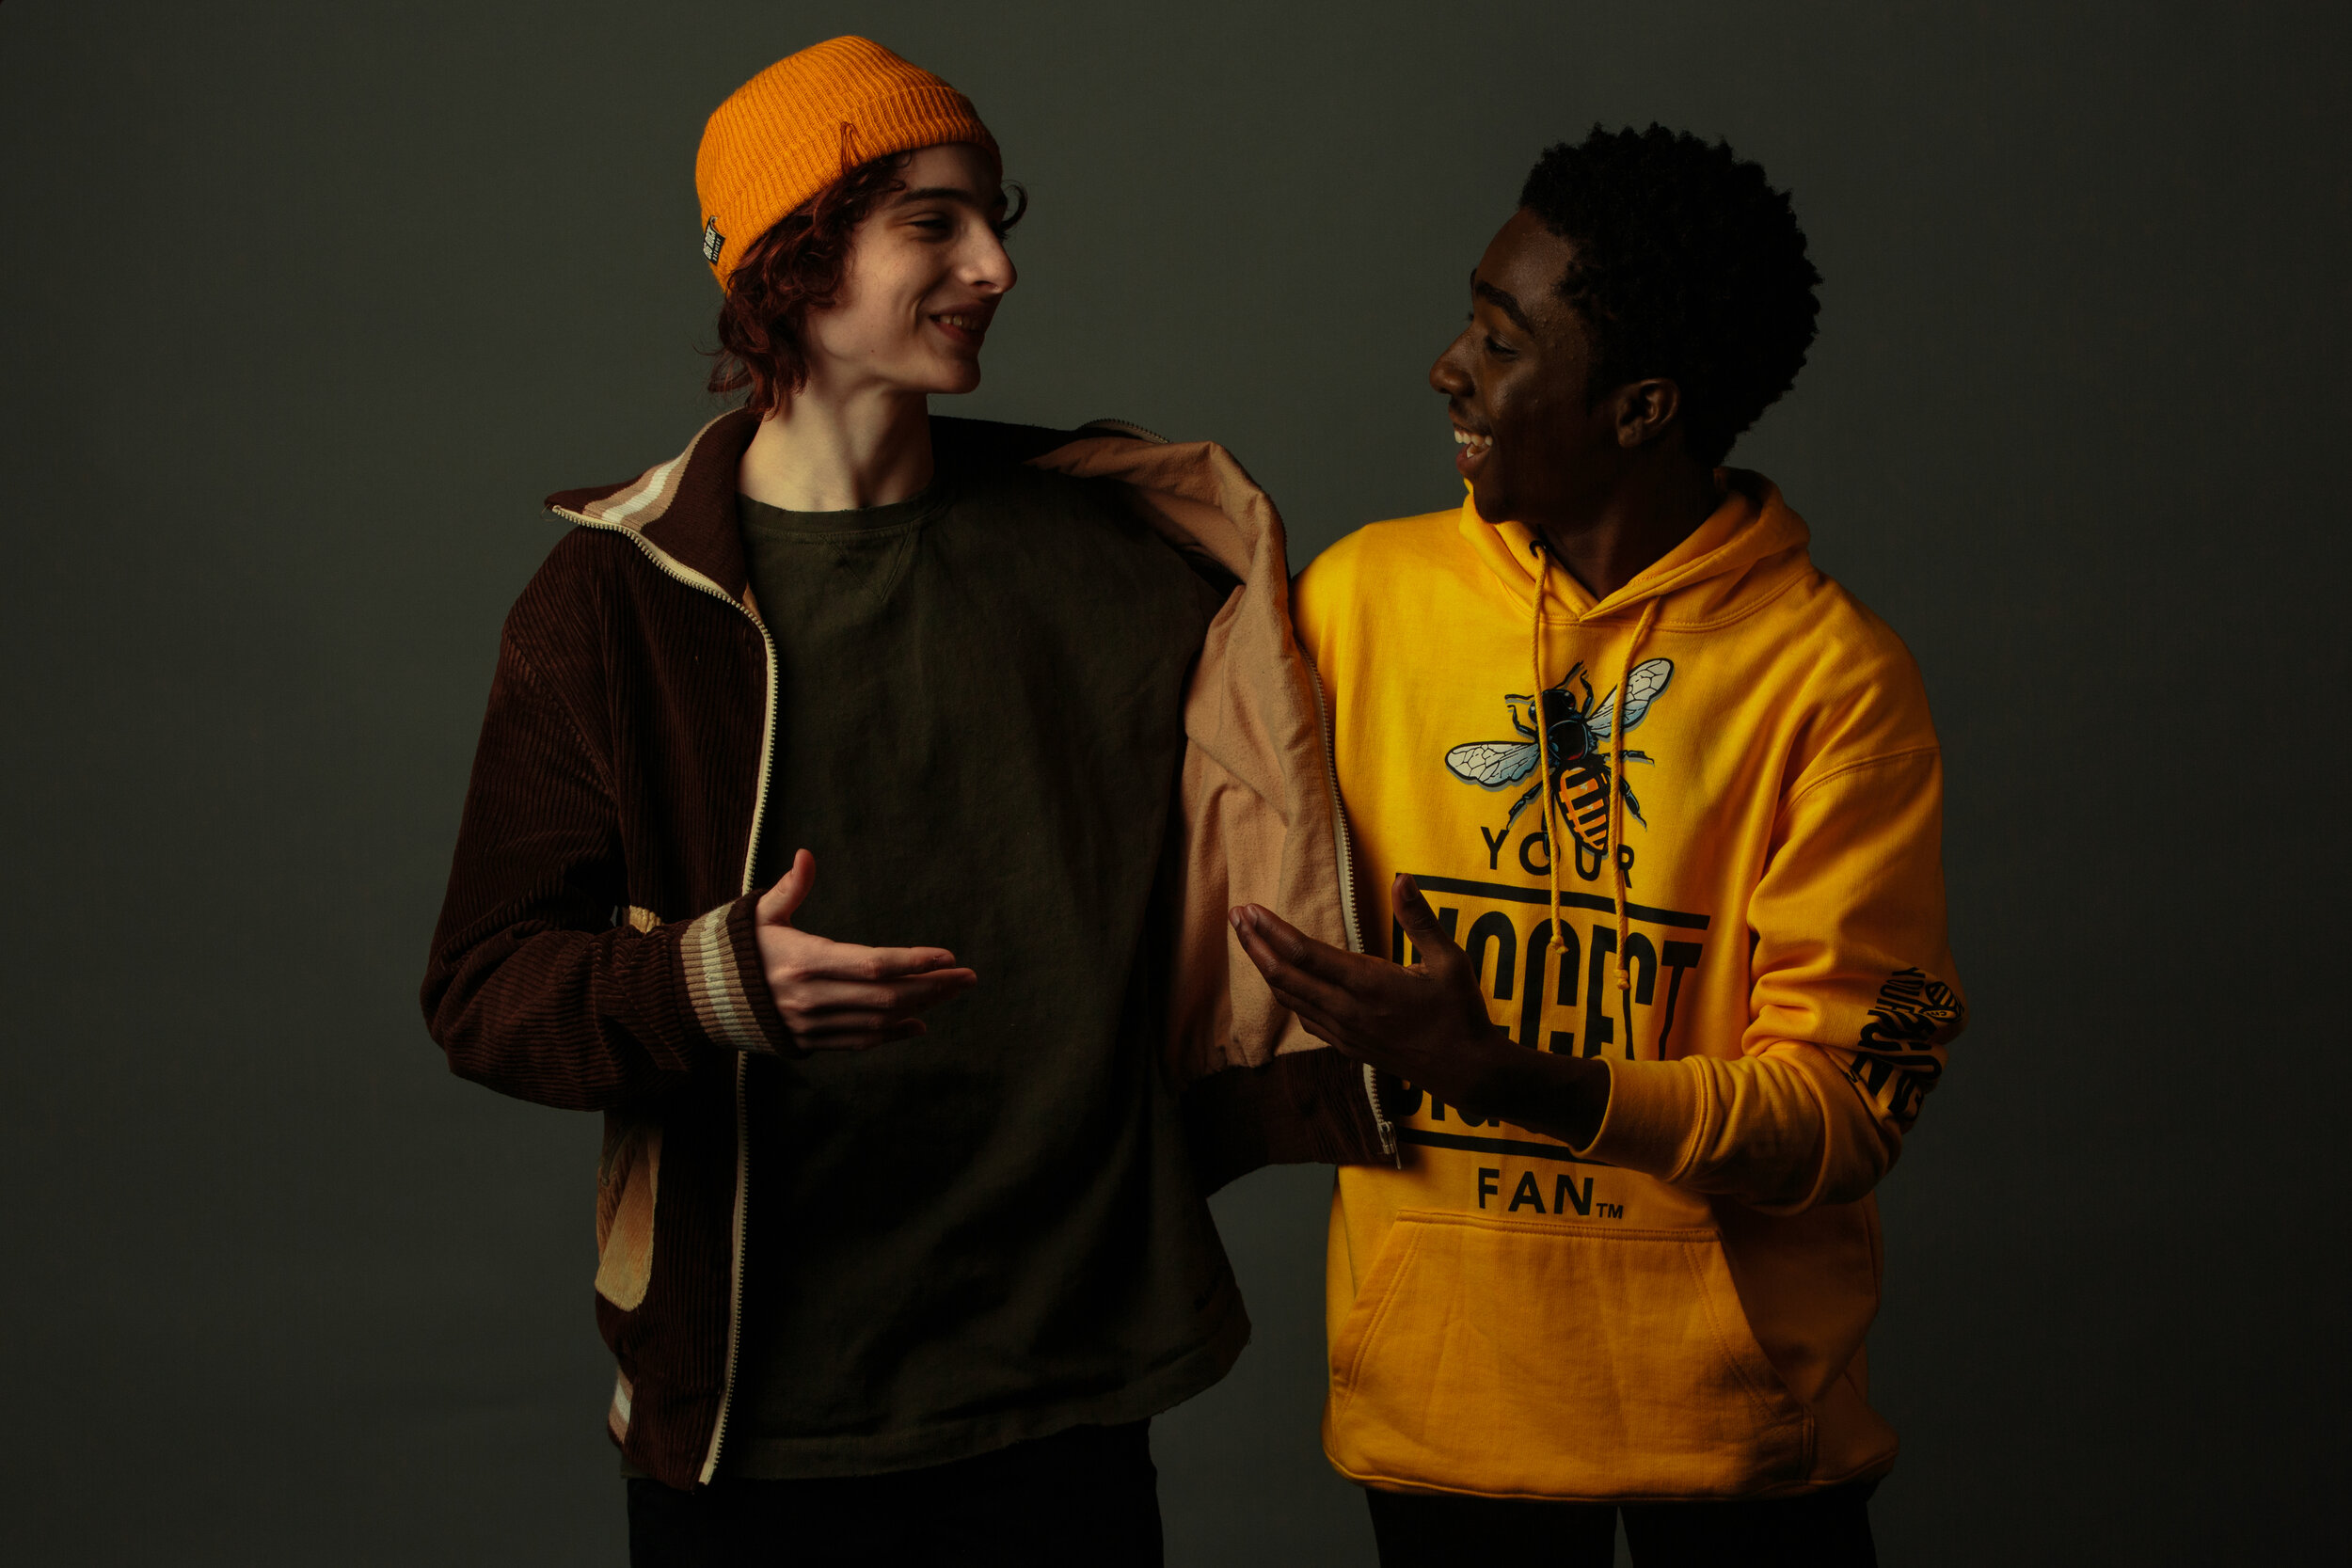 Finn Wolfhard Updates On Twitter Part 2 Finn Wolfhard And Caleb Mclaughlin Photographed By